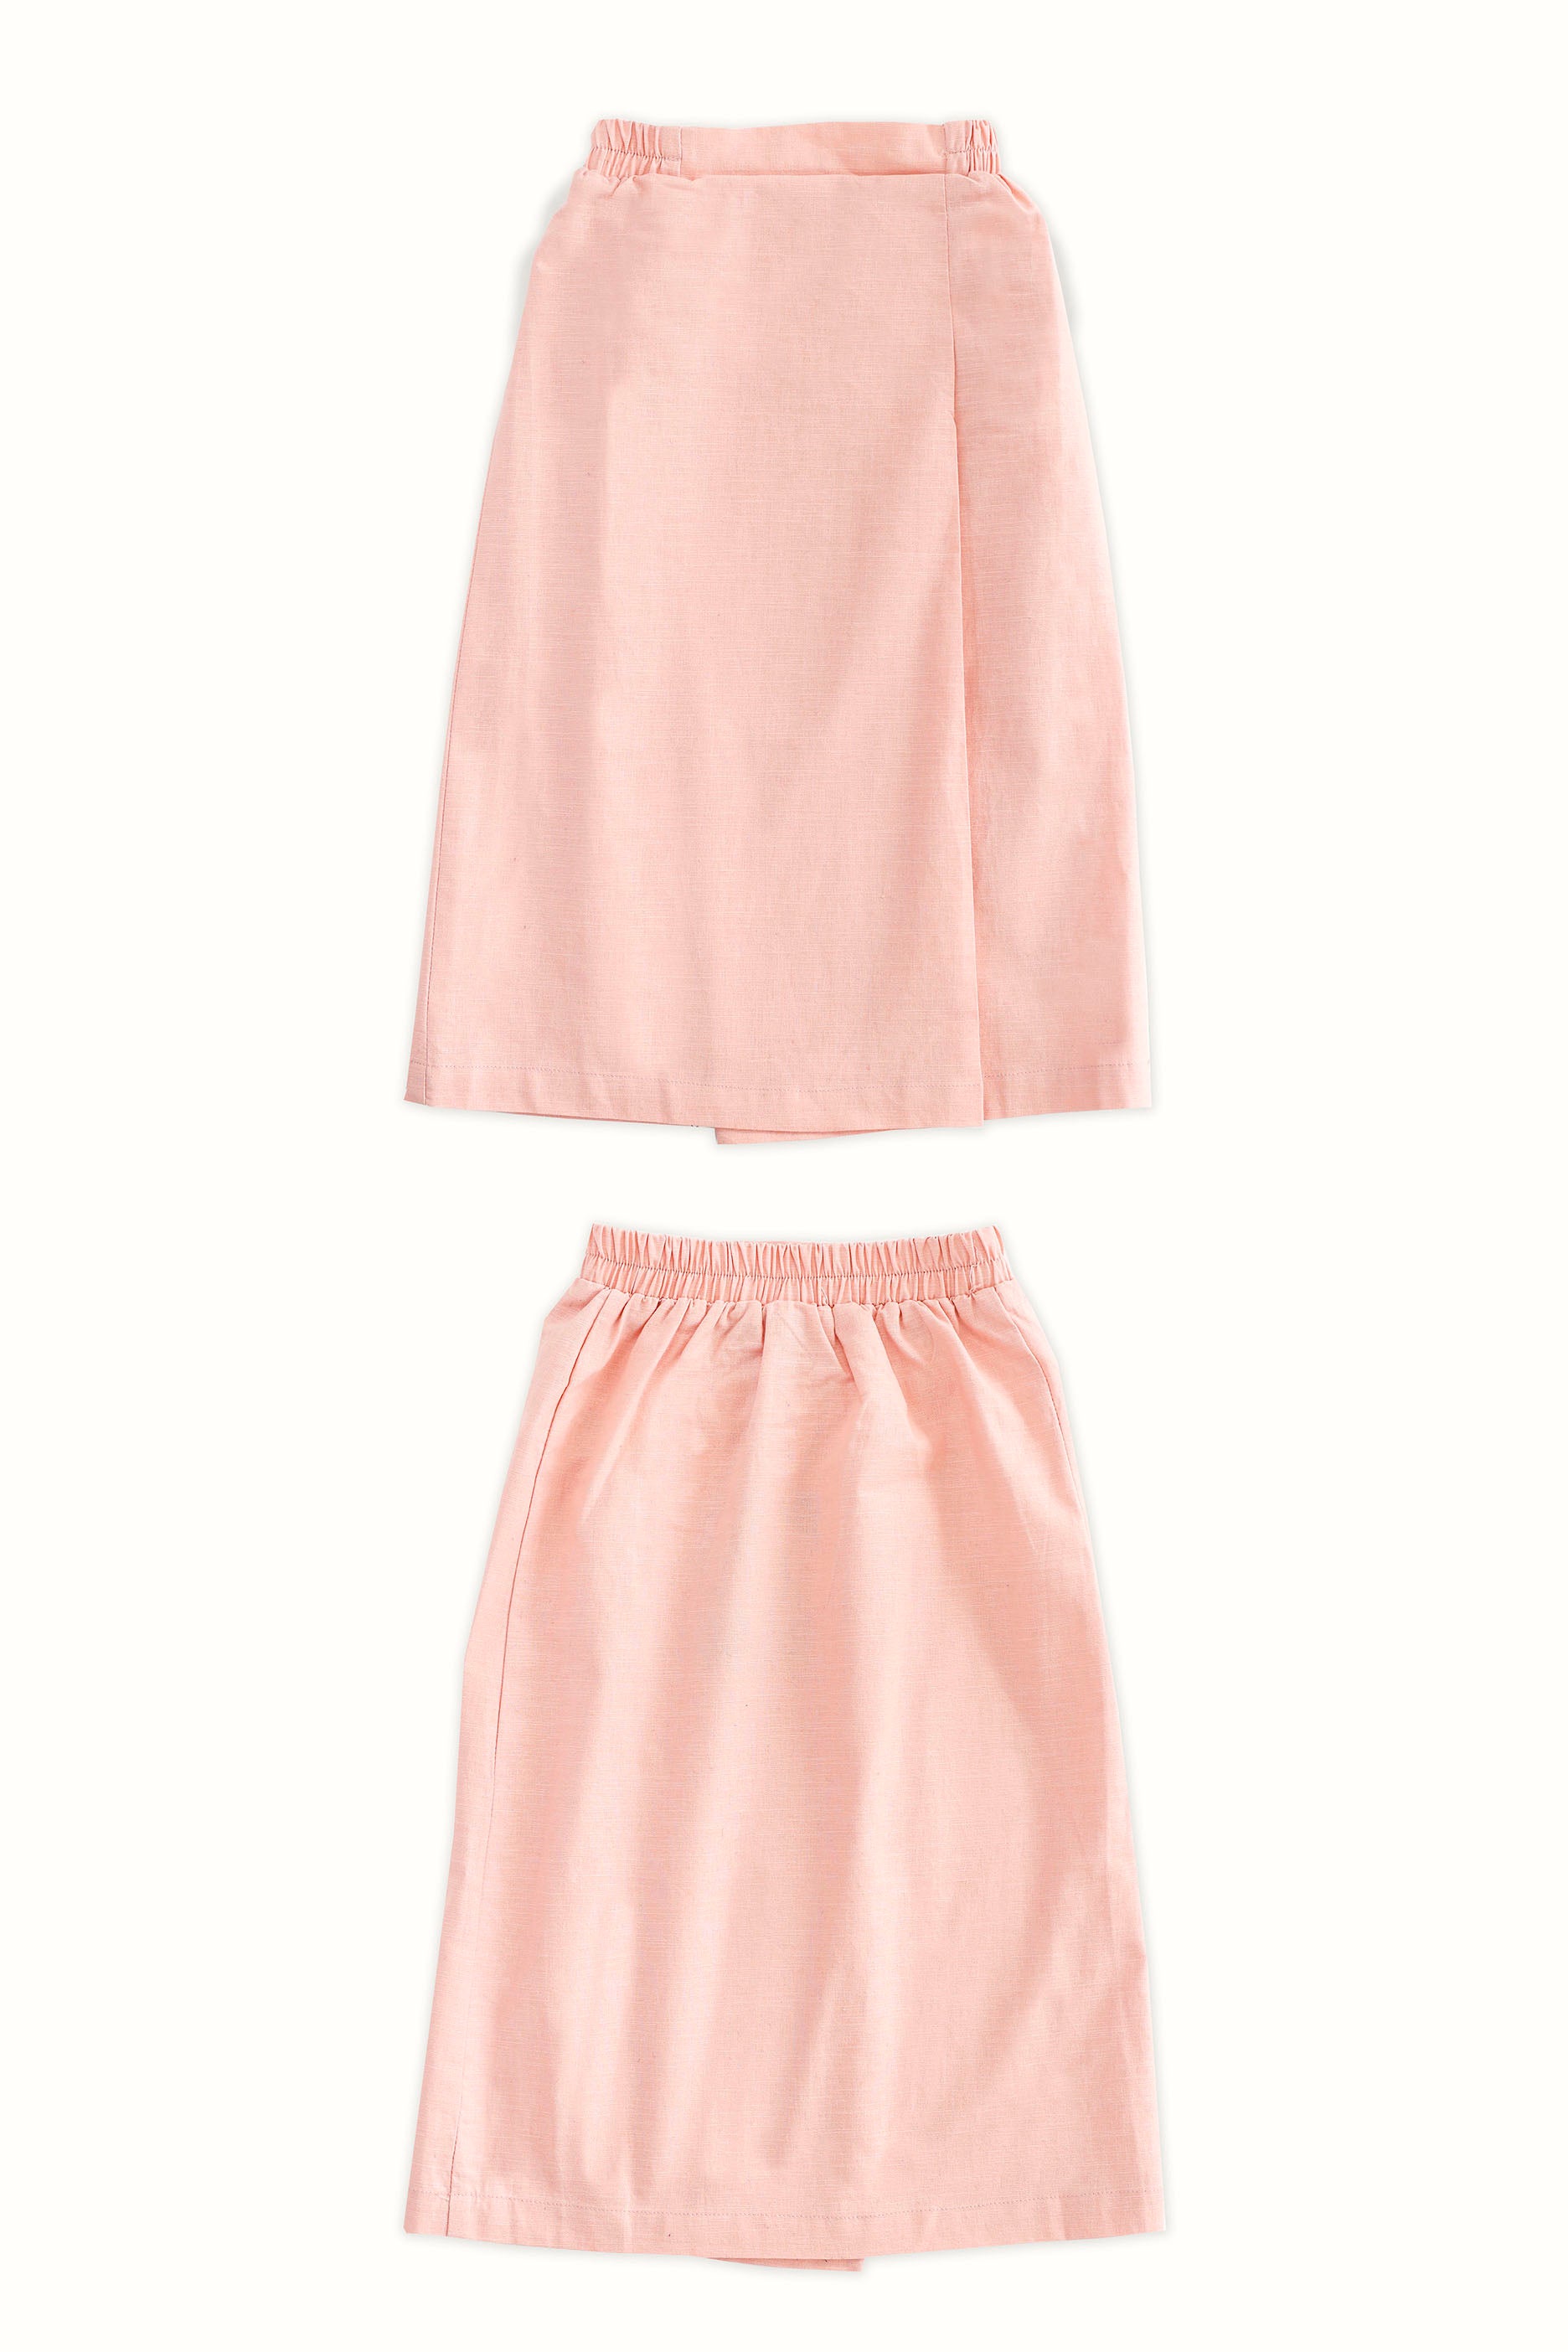 The Bumi Classic Skirt Dusty Pink